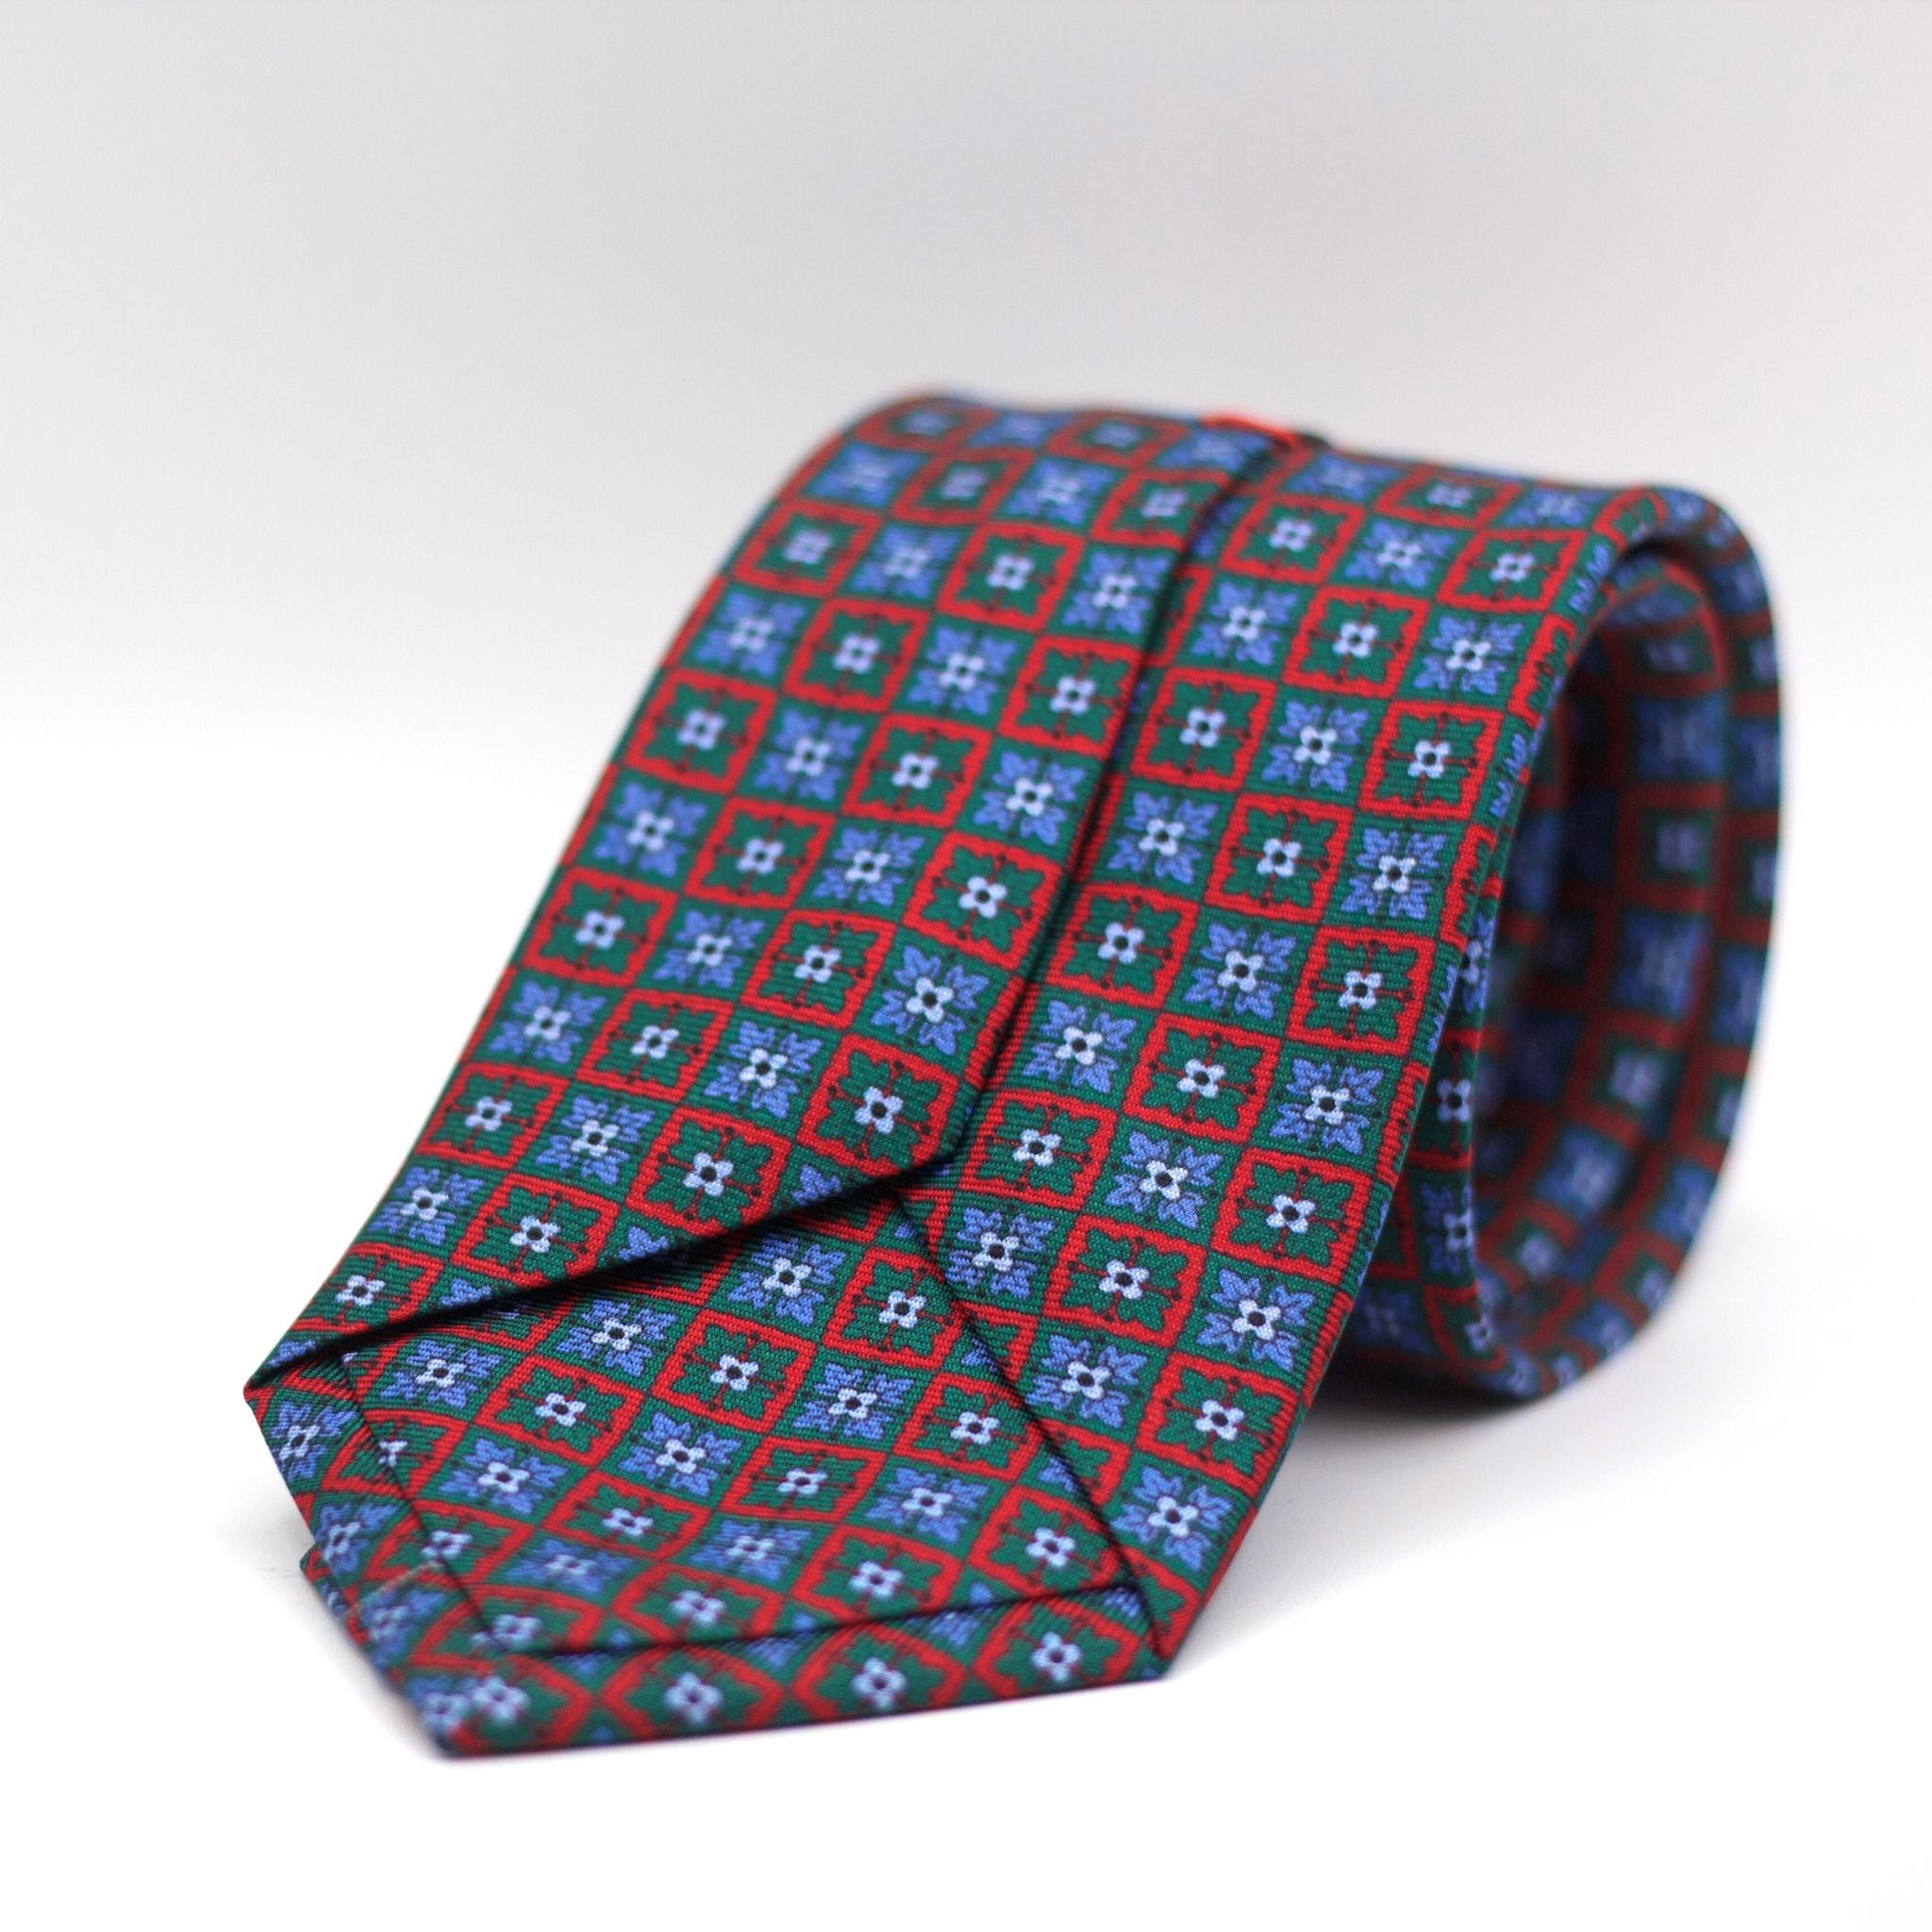 Cruciani & Bella 100% Silk Printed Self-Tipped Green and Red, Light Blue Motif Tie Handmade in Rome, Italy. 8 cm x 150 cm